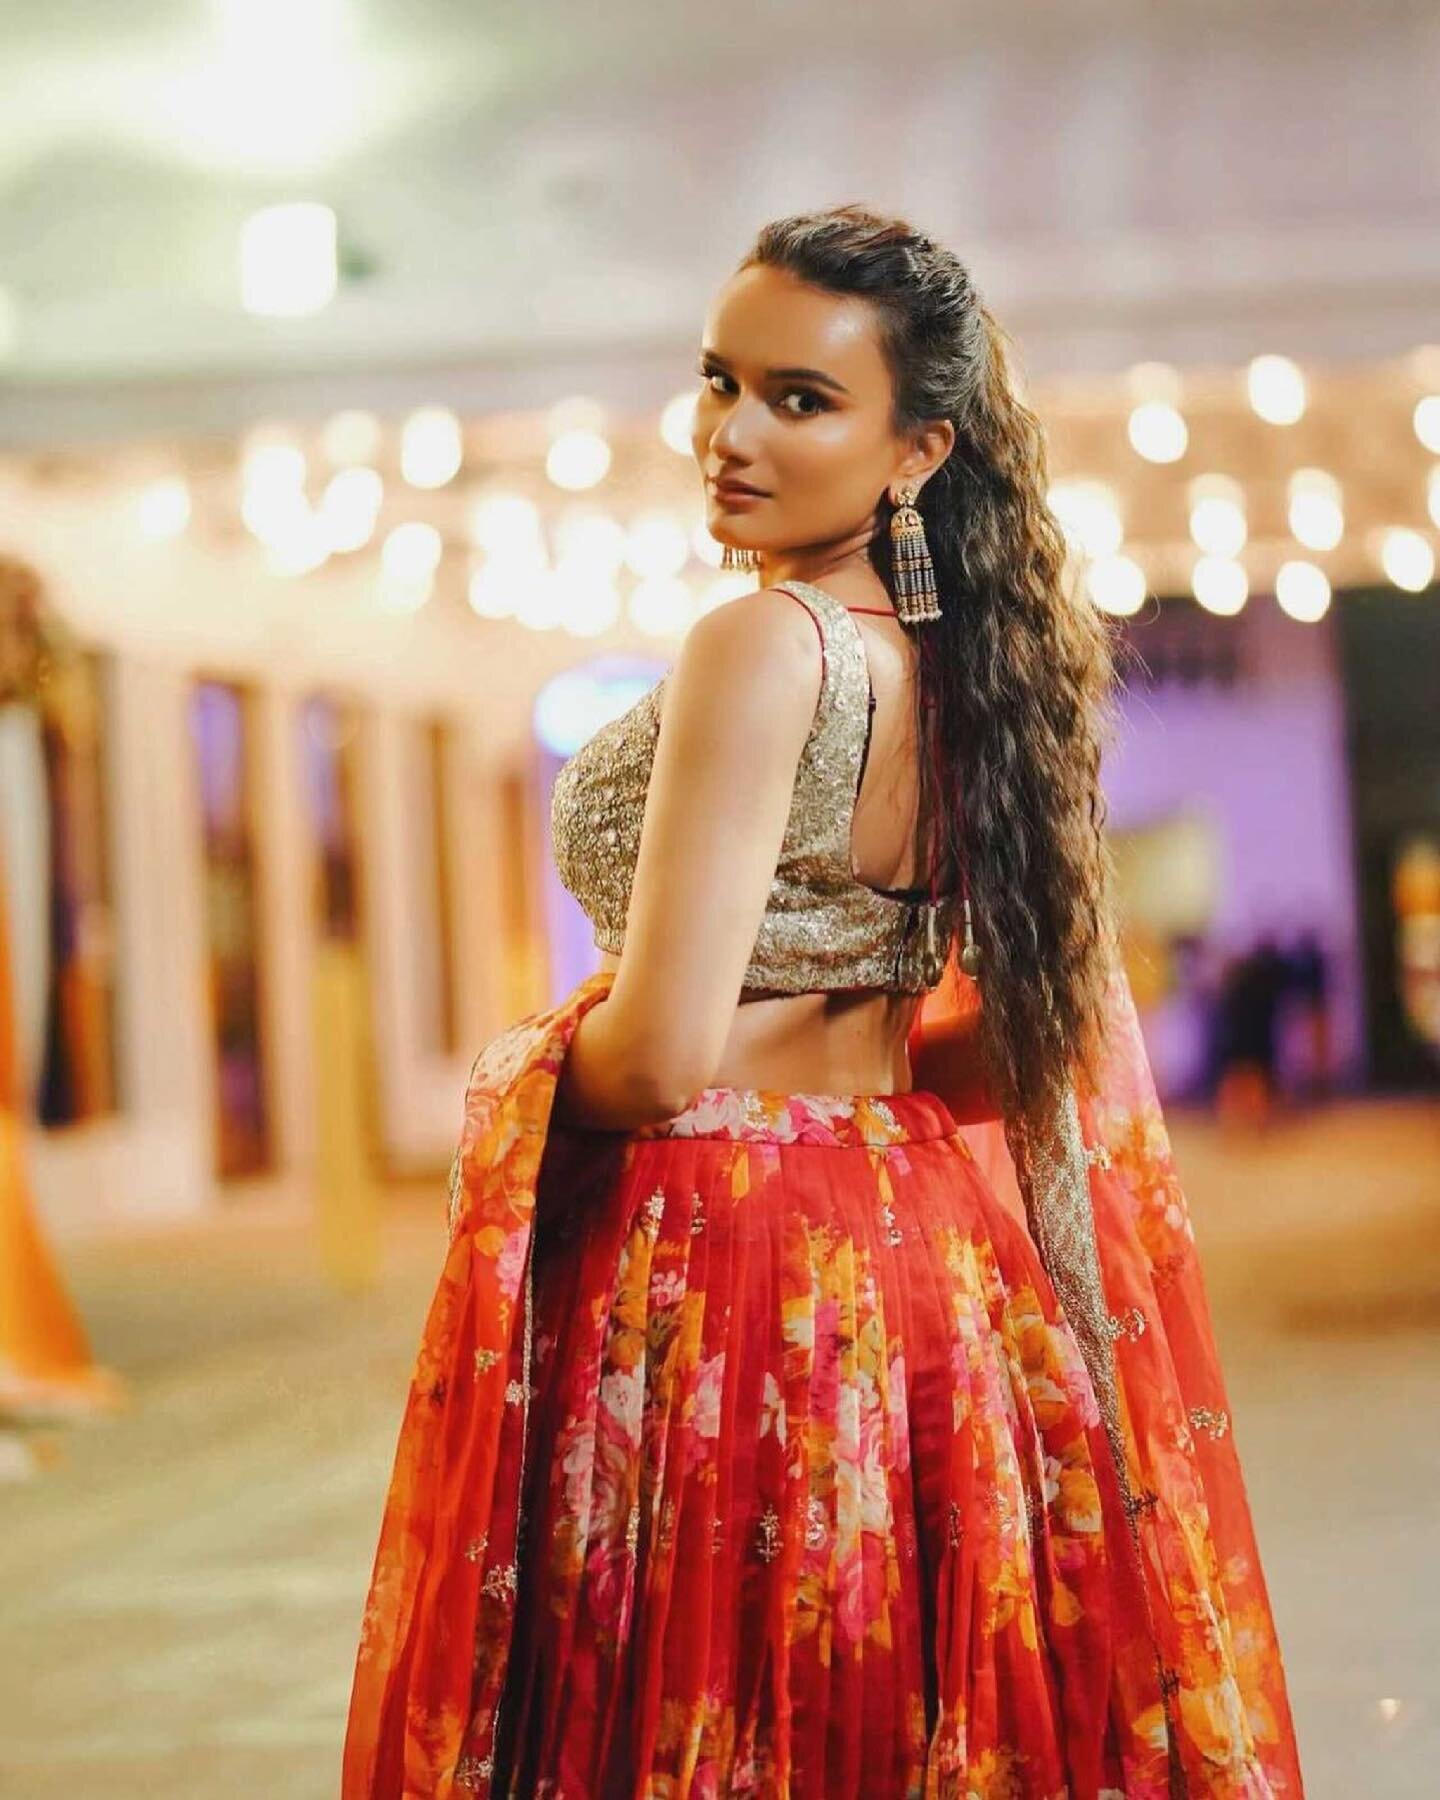 Can&rsquo;t get our 👀 off of her 😍

@devarshissoni wearing a printed organza Lehenga paired with a sequins mirror work blouse for a family wedding 🧡

#lehenga #lehengacholi #indianwedding #indianwear #indianbride #indianwear #weddinginspo